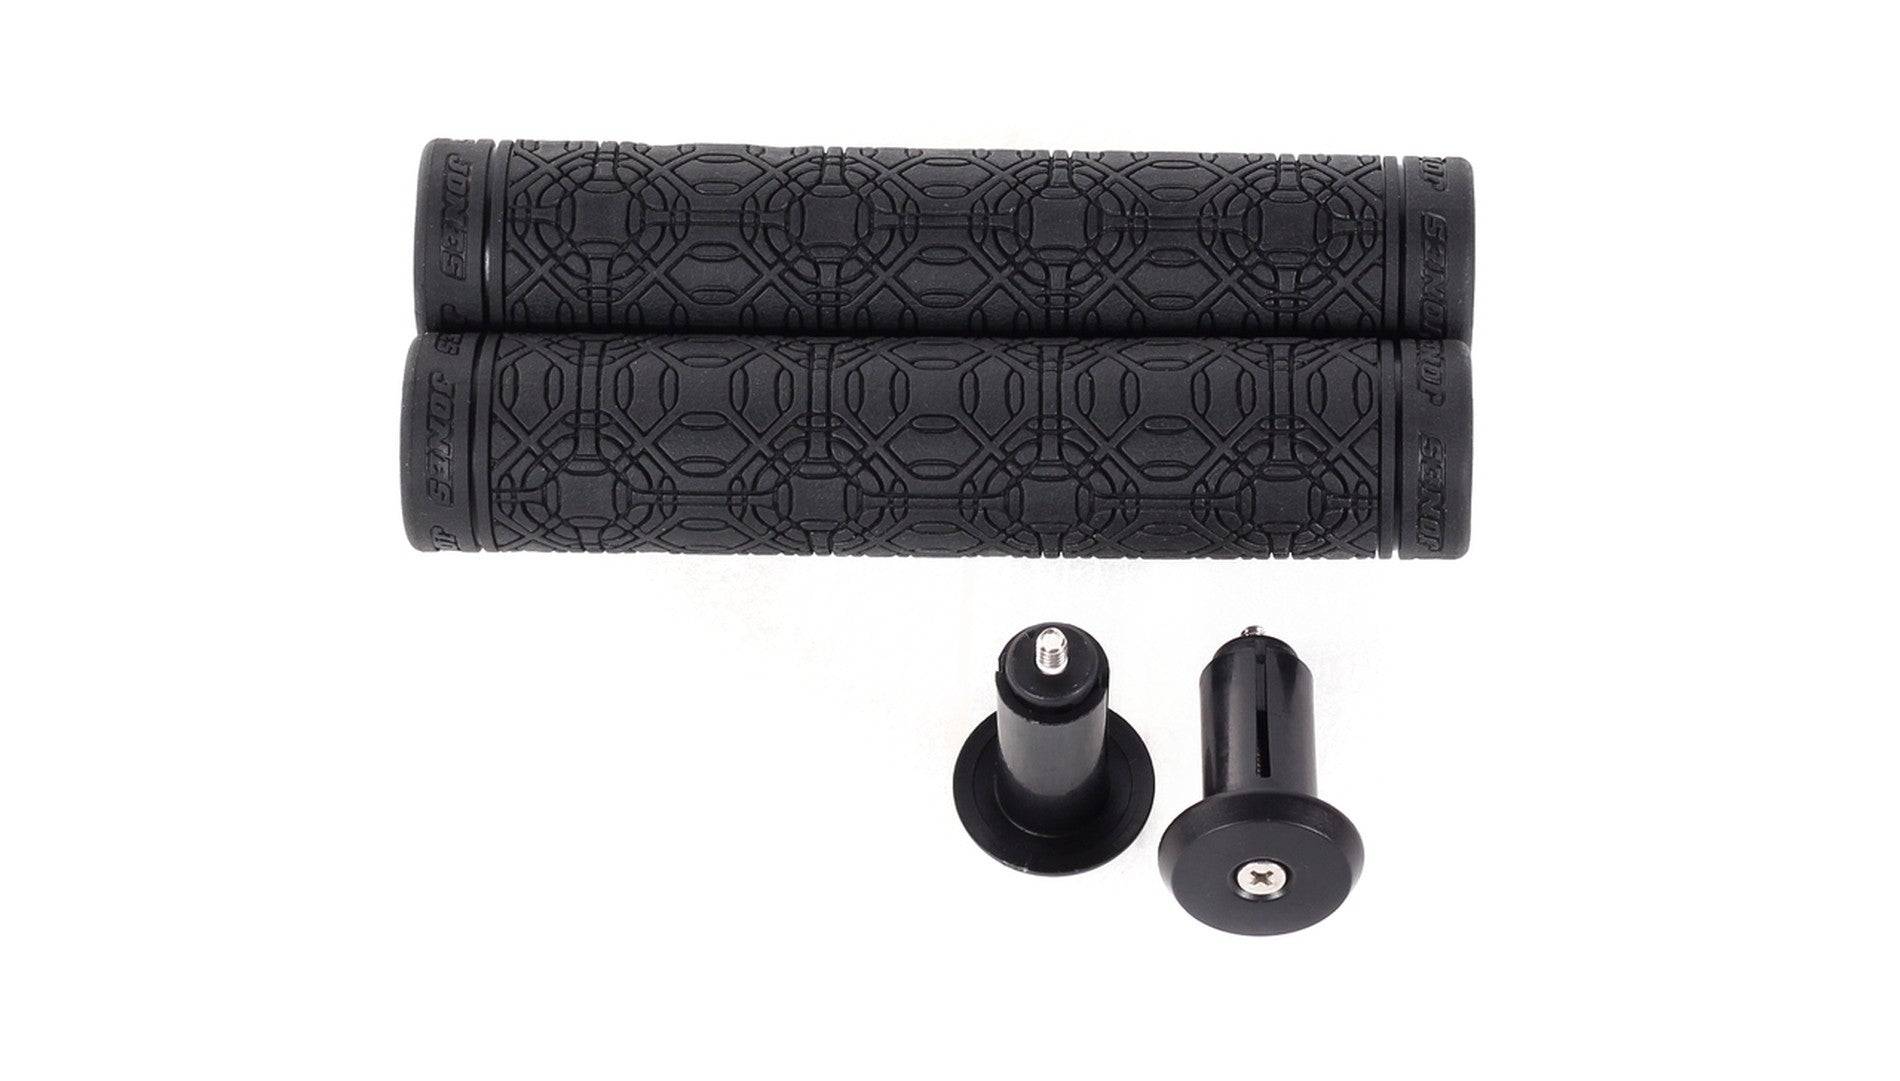 Absolute Black Silicone MTB Grips Blue - Fishface Cycles